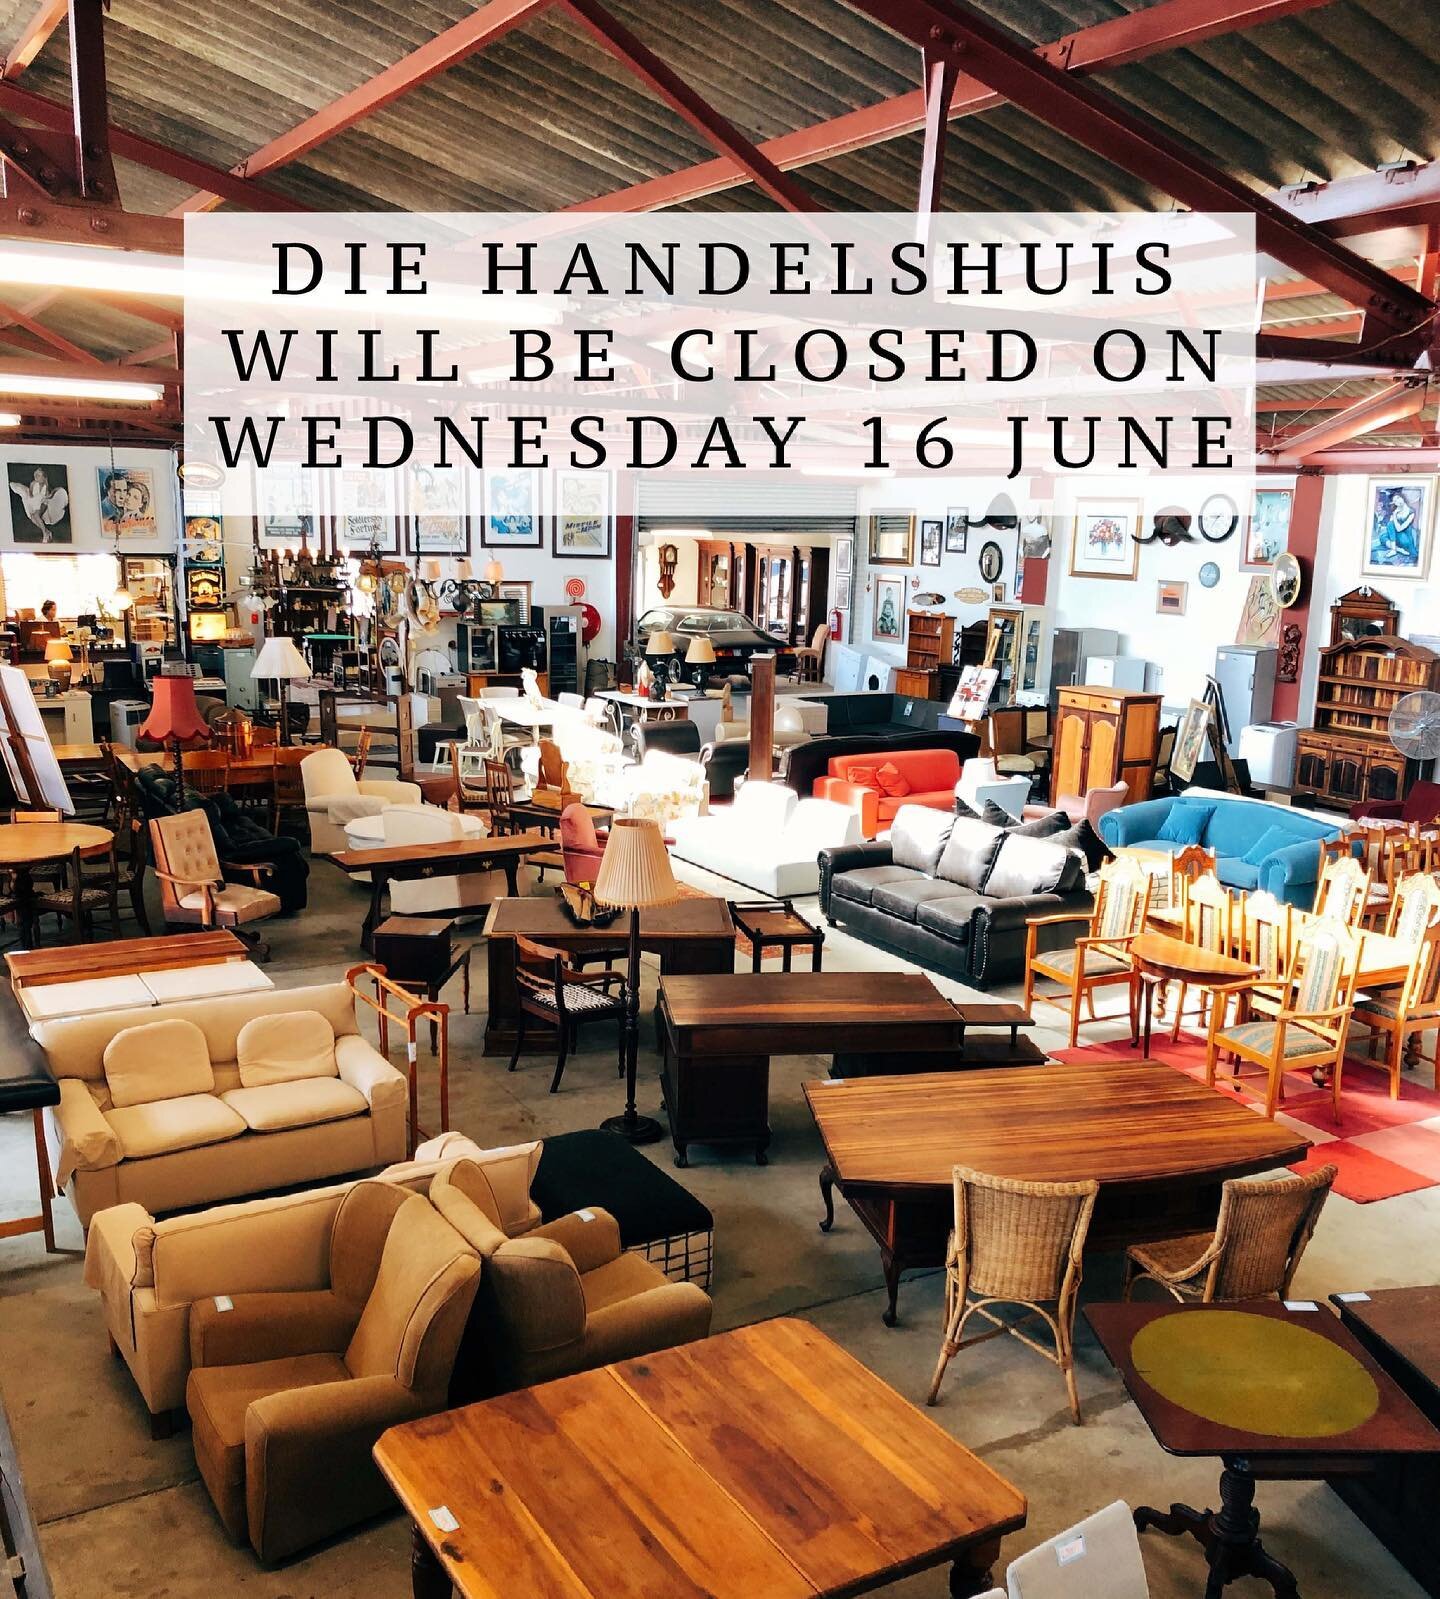 Die Handelshuis will be closed tomorrow, Weds 16 June, but we&rsquo;ll be back in action on Thursday 17 June from 9am 😁👍
.
.
.
.
.
.
.
.
.
#diehandelshuis #antique #antiques #furniture #secondhandfurniture #interiors #decor #interiordesign #home #v